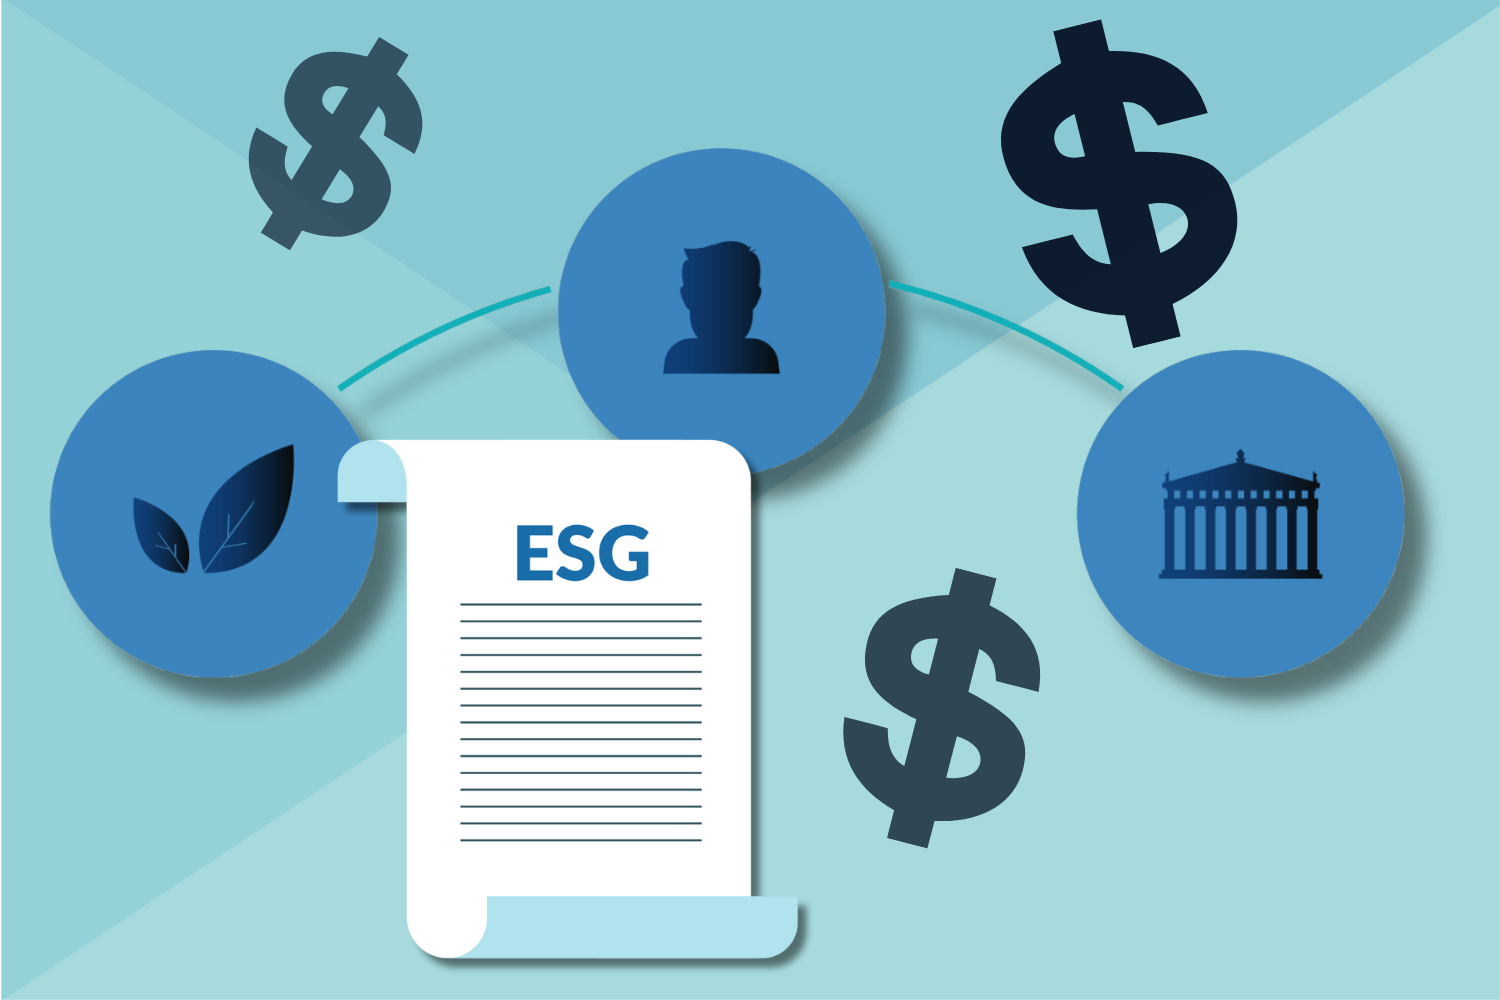 ESG due diligence is no longer optional: Shareholder activism accelerates as major banks face investor calls for climate action